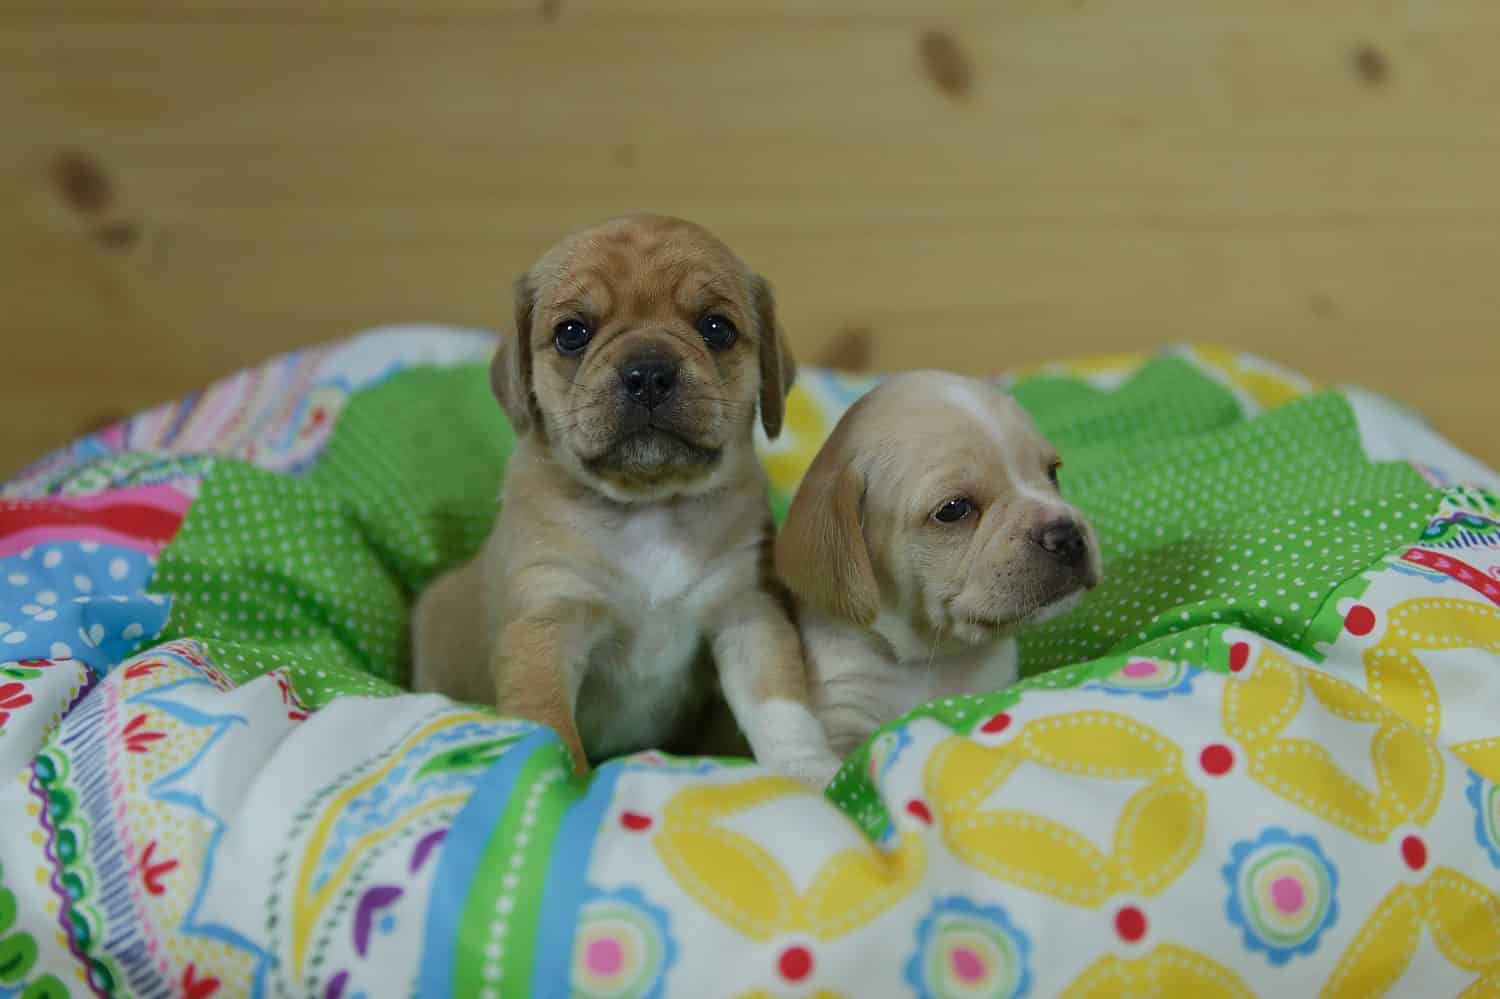 Sweet Puggle Puppies in their dog bed